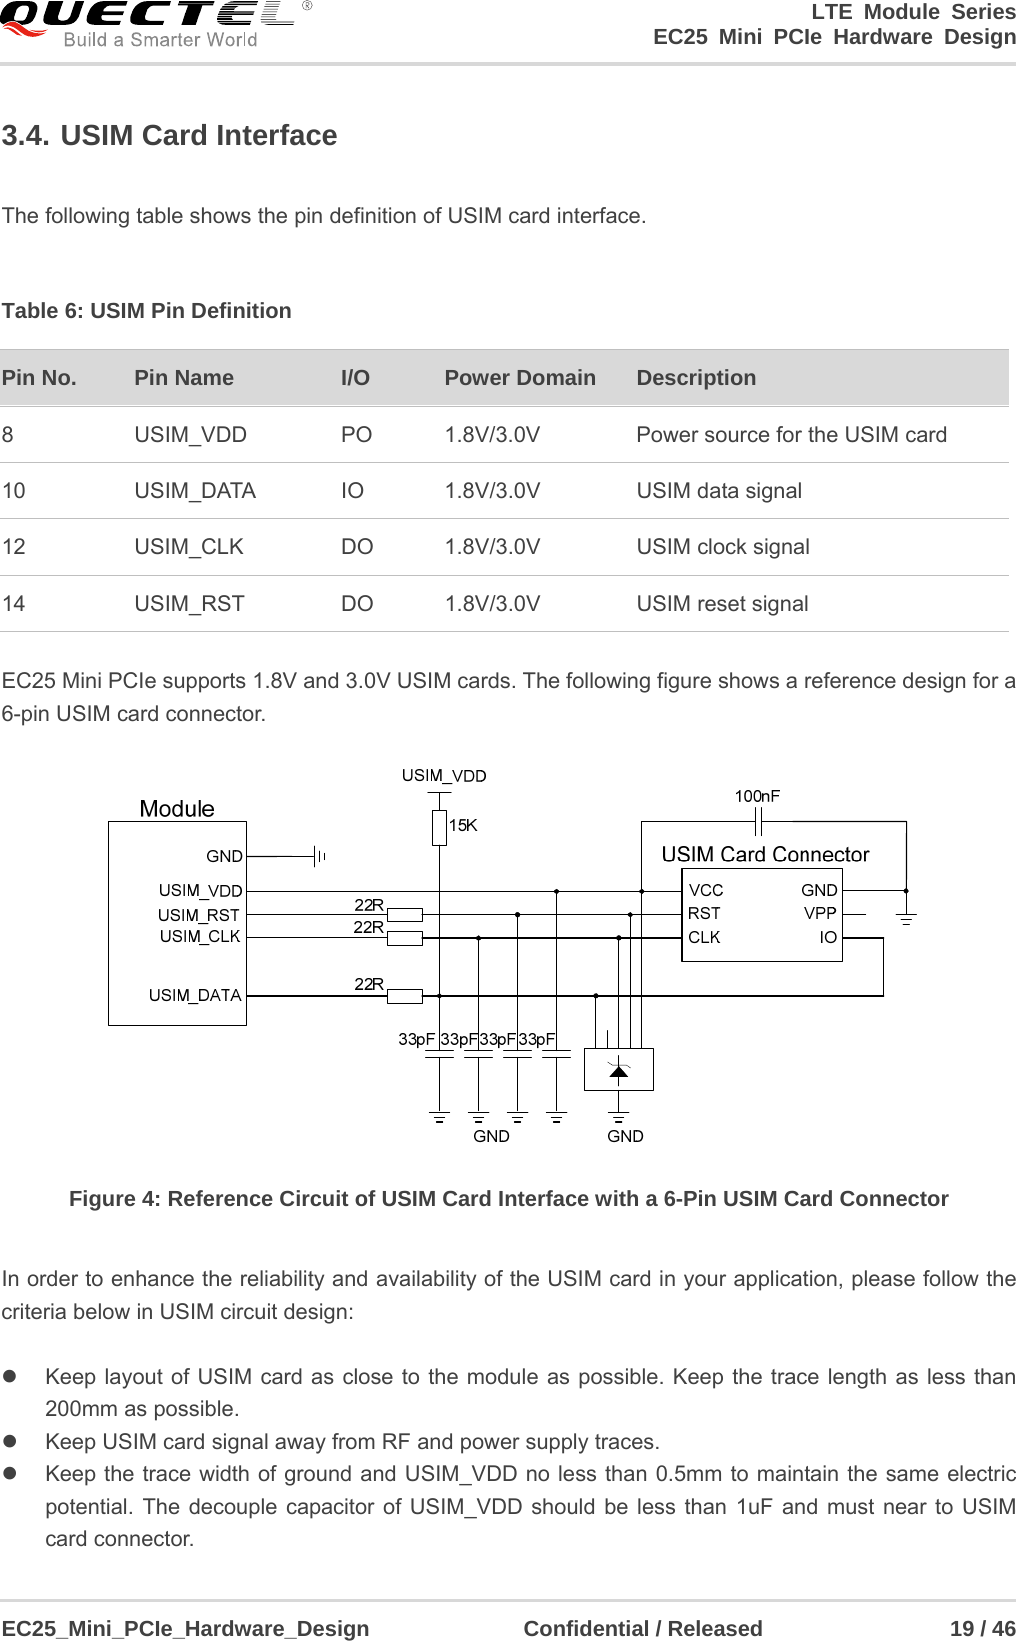                                        LTE Module Series                                                  EC25 Mini PCIe Hardware Design  EC25_Mini_PCIe_Hardware_Design              Confidential / Released                 19 / 46    3.4. USIM Card Interface  The following table shows the pin definition of USIM card interface.  Table 6: USIM Pin Definition  EC25 Mini PCIe supports 1.8V and 3.0V USIM cards. The following figure shows a reference design for a 6-pin USIM card connector.  Figure 4: Reference Circuit of USIM Card Interface with a 6-Pin USIM Card Connector  In order to enhance the reliability and availability of the USIM card in your application, please follow the criteria below in USIM circuit design:    Keep layout of USIM card as close to the module as possible. Keep the trace length as less than 200mm as possible.     Keep USIM card signal away from RF and power supply traces.   Keep the trace width of ground and USIM_VDD no less than 0.5mm to maintain the same electric potential. The decouple capacitor of USIM_VDD should be less than 1uF and must near to USIM card connector. Pin No.  Pin Name I/O  Power Domain    Description 8 USIM_VDD PO       1.8V/3.0V         Power source for the USIM card 10 USIM_DATA IO 1.8V/3.0V USIM data signal 12 USIM_CLK DO 1.8V/3.0V USIM clock signal 14 USIM_RST DO       1.8V/3.0V USIM reset signal 